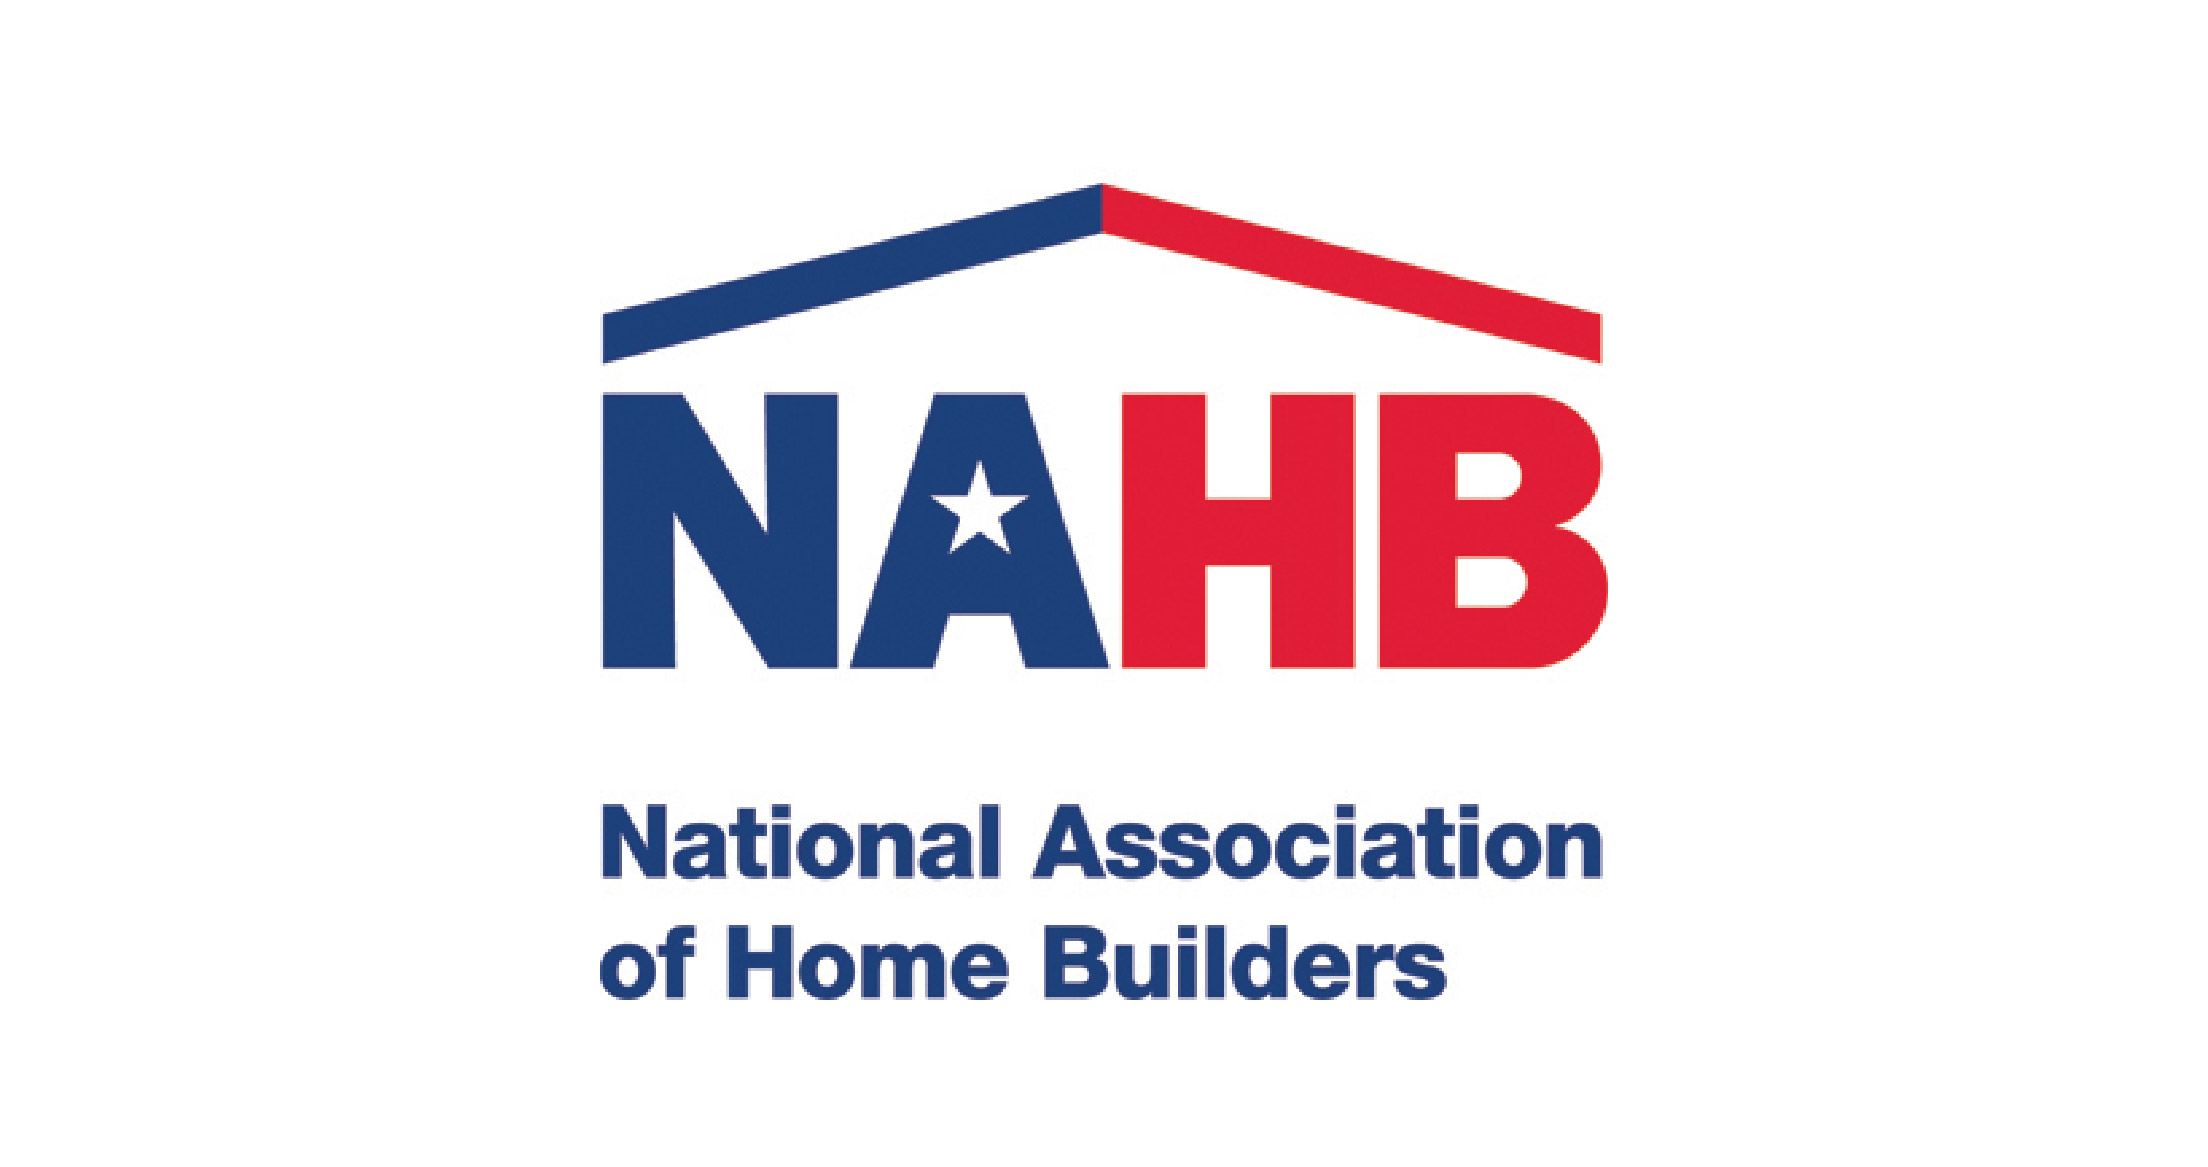 PBS Contractors Awarded a National Association of Home Builders Remodeling Award